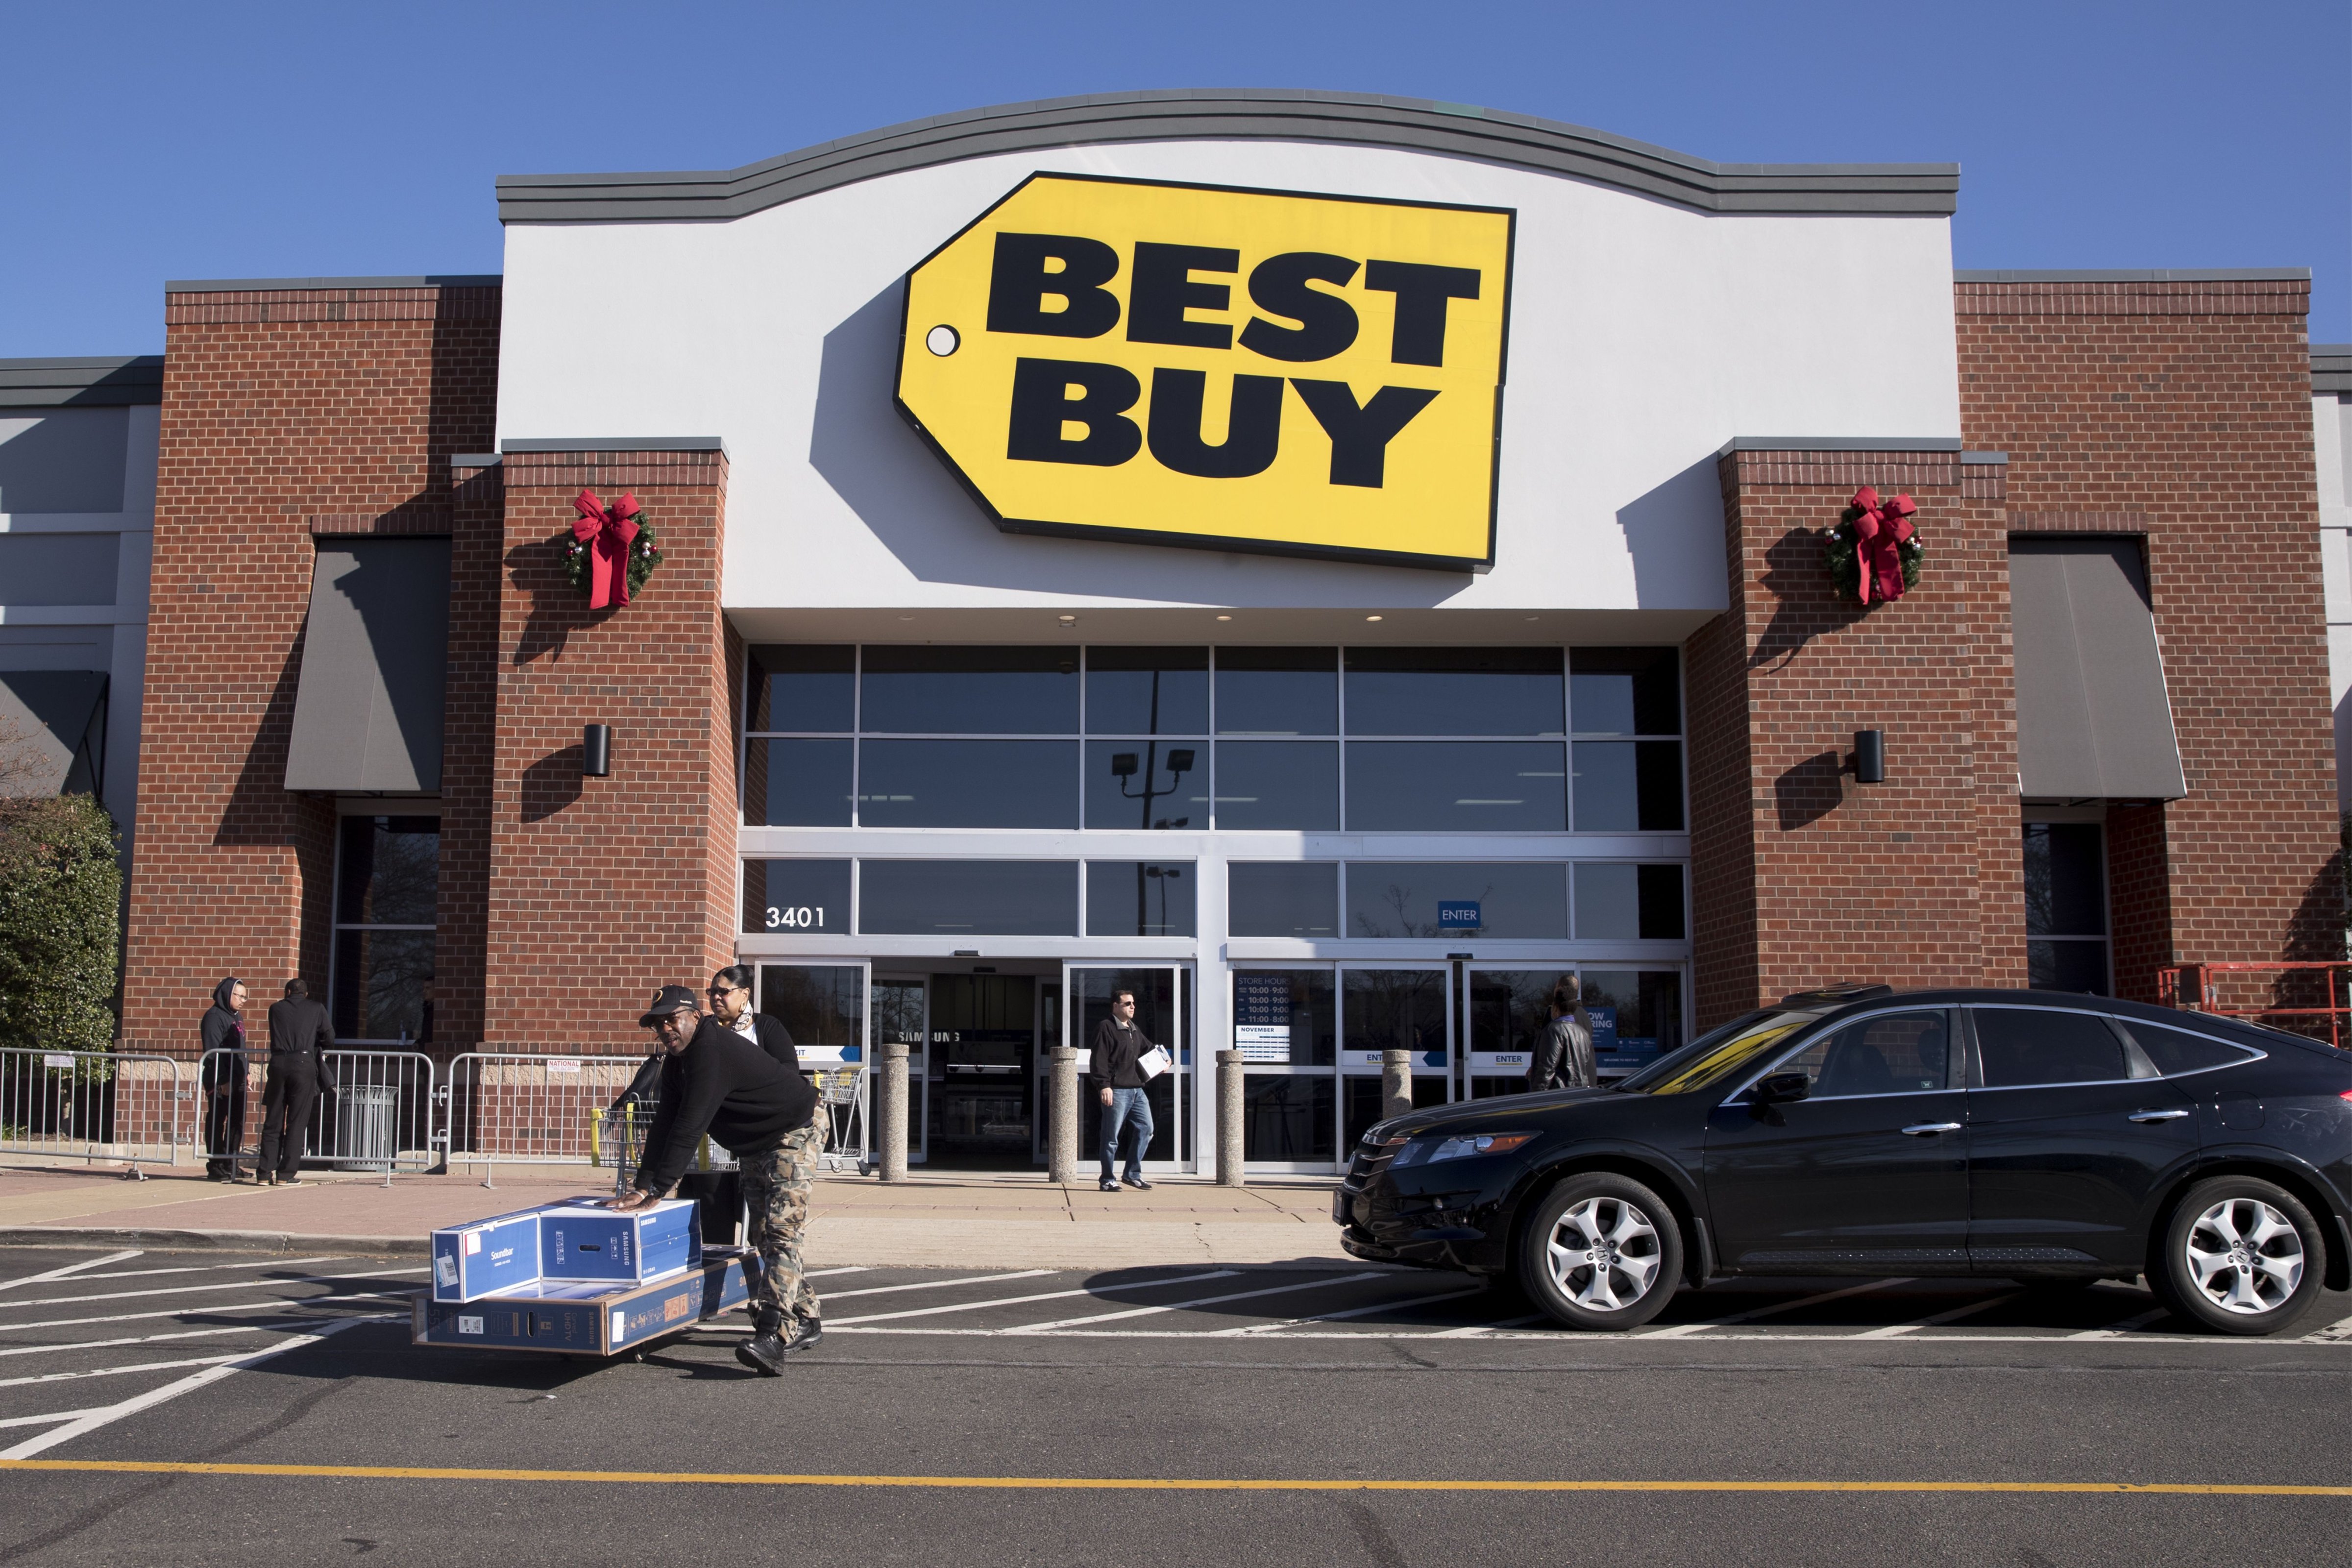 Customers push a cart full of electronics they just purchased at a Best Buy store on Black Friday in Alexandria, Virginia, on Nov. 24, 2017. (MICHAEL REYNOLDS—EPA-EFE/REX/Shutterstock)